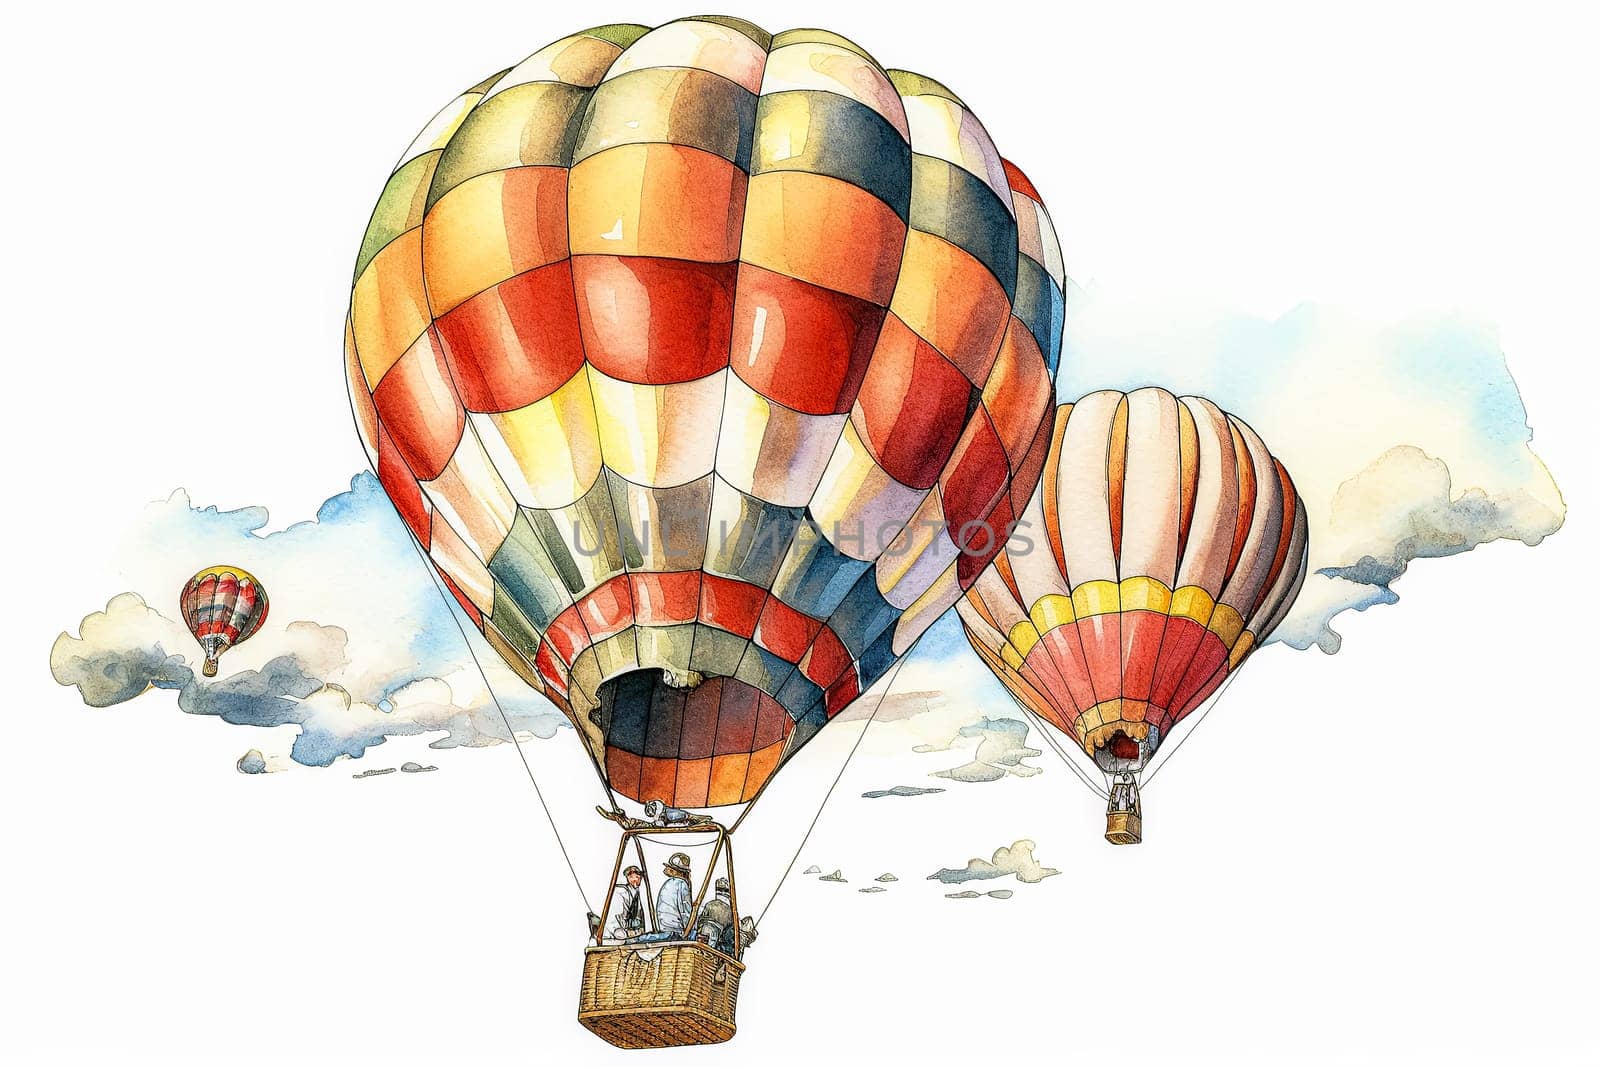 This watercolor illustration depicts charming hot air balloon adorned with floral designs, floating gracefully in the sky. Perfect for whimsical designs.